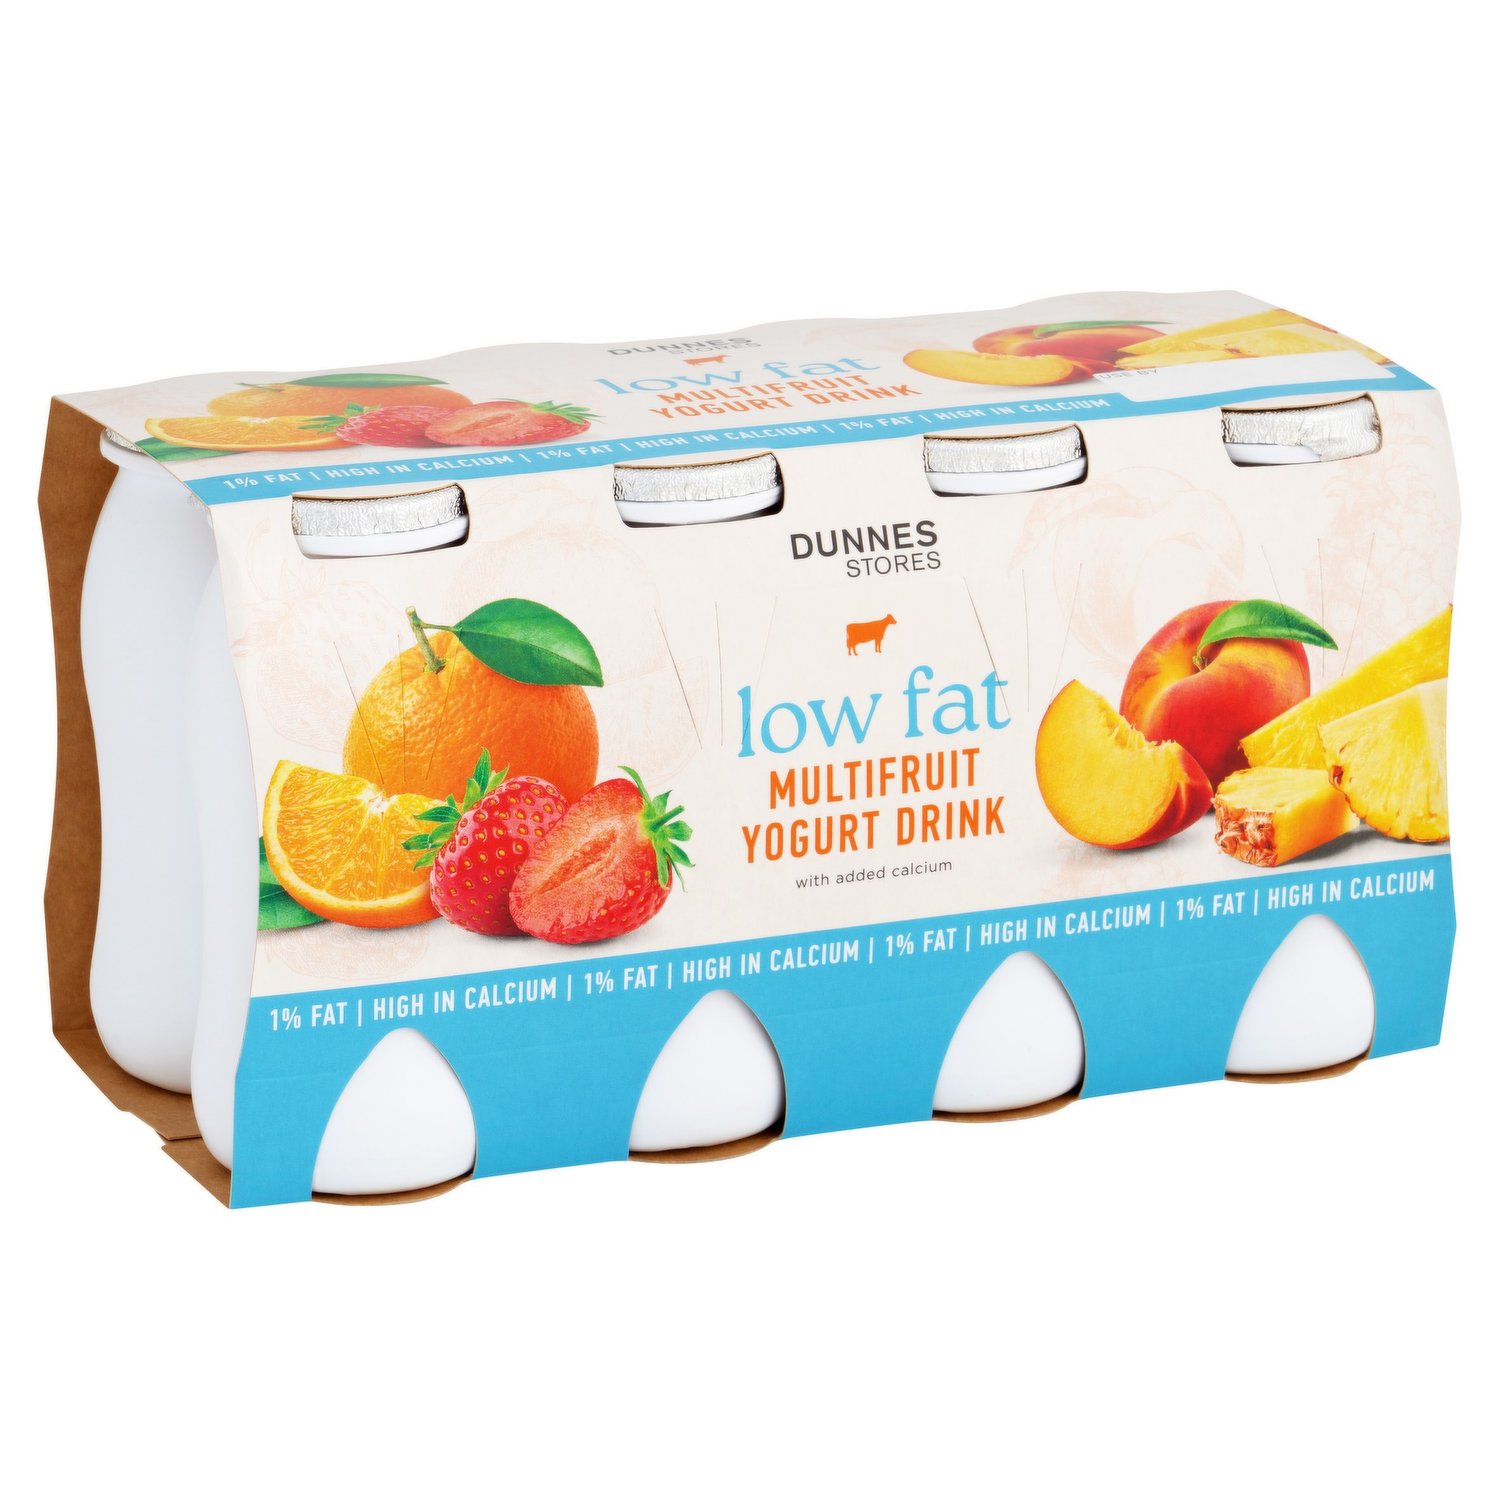 Dunnes Stores My Family Favourites Low Fat Multifruit Yogurt Drink